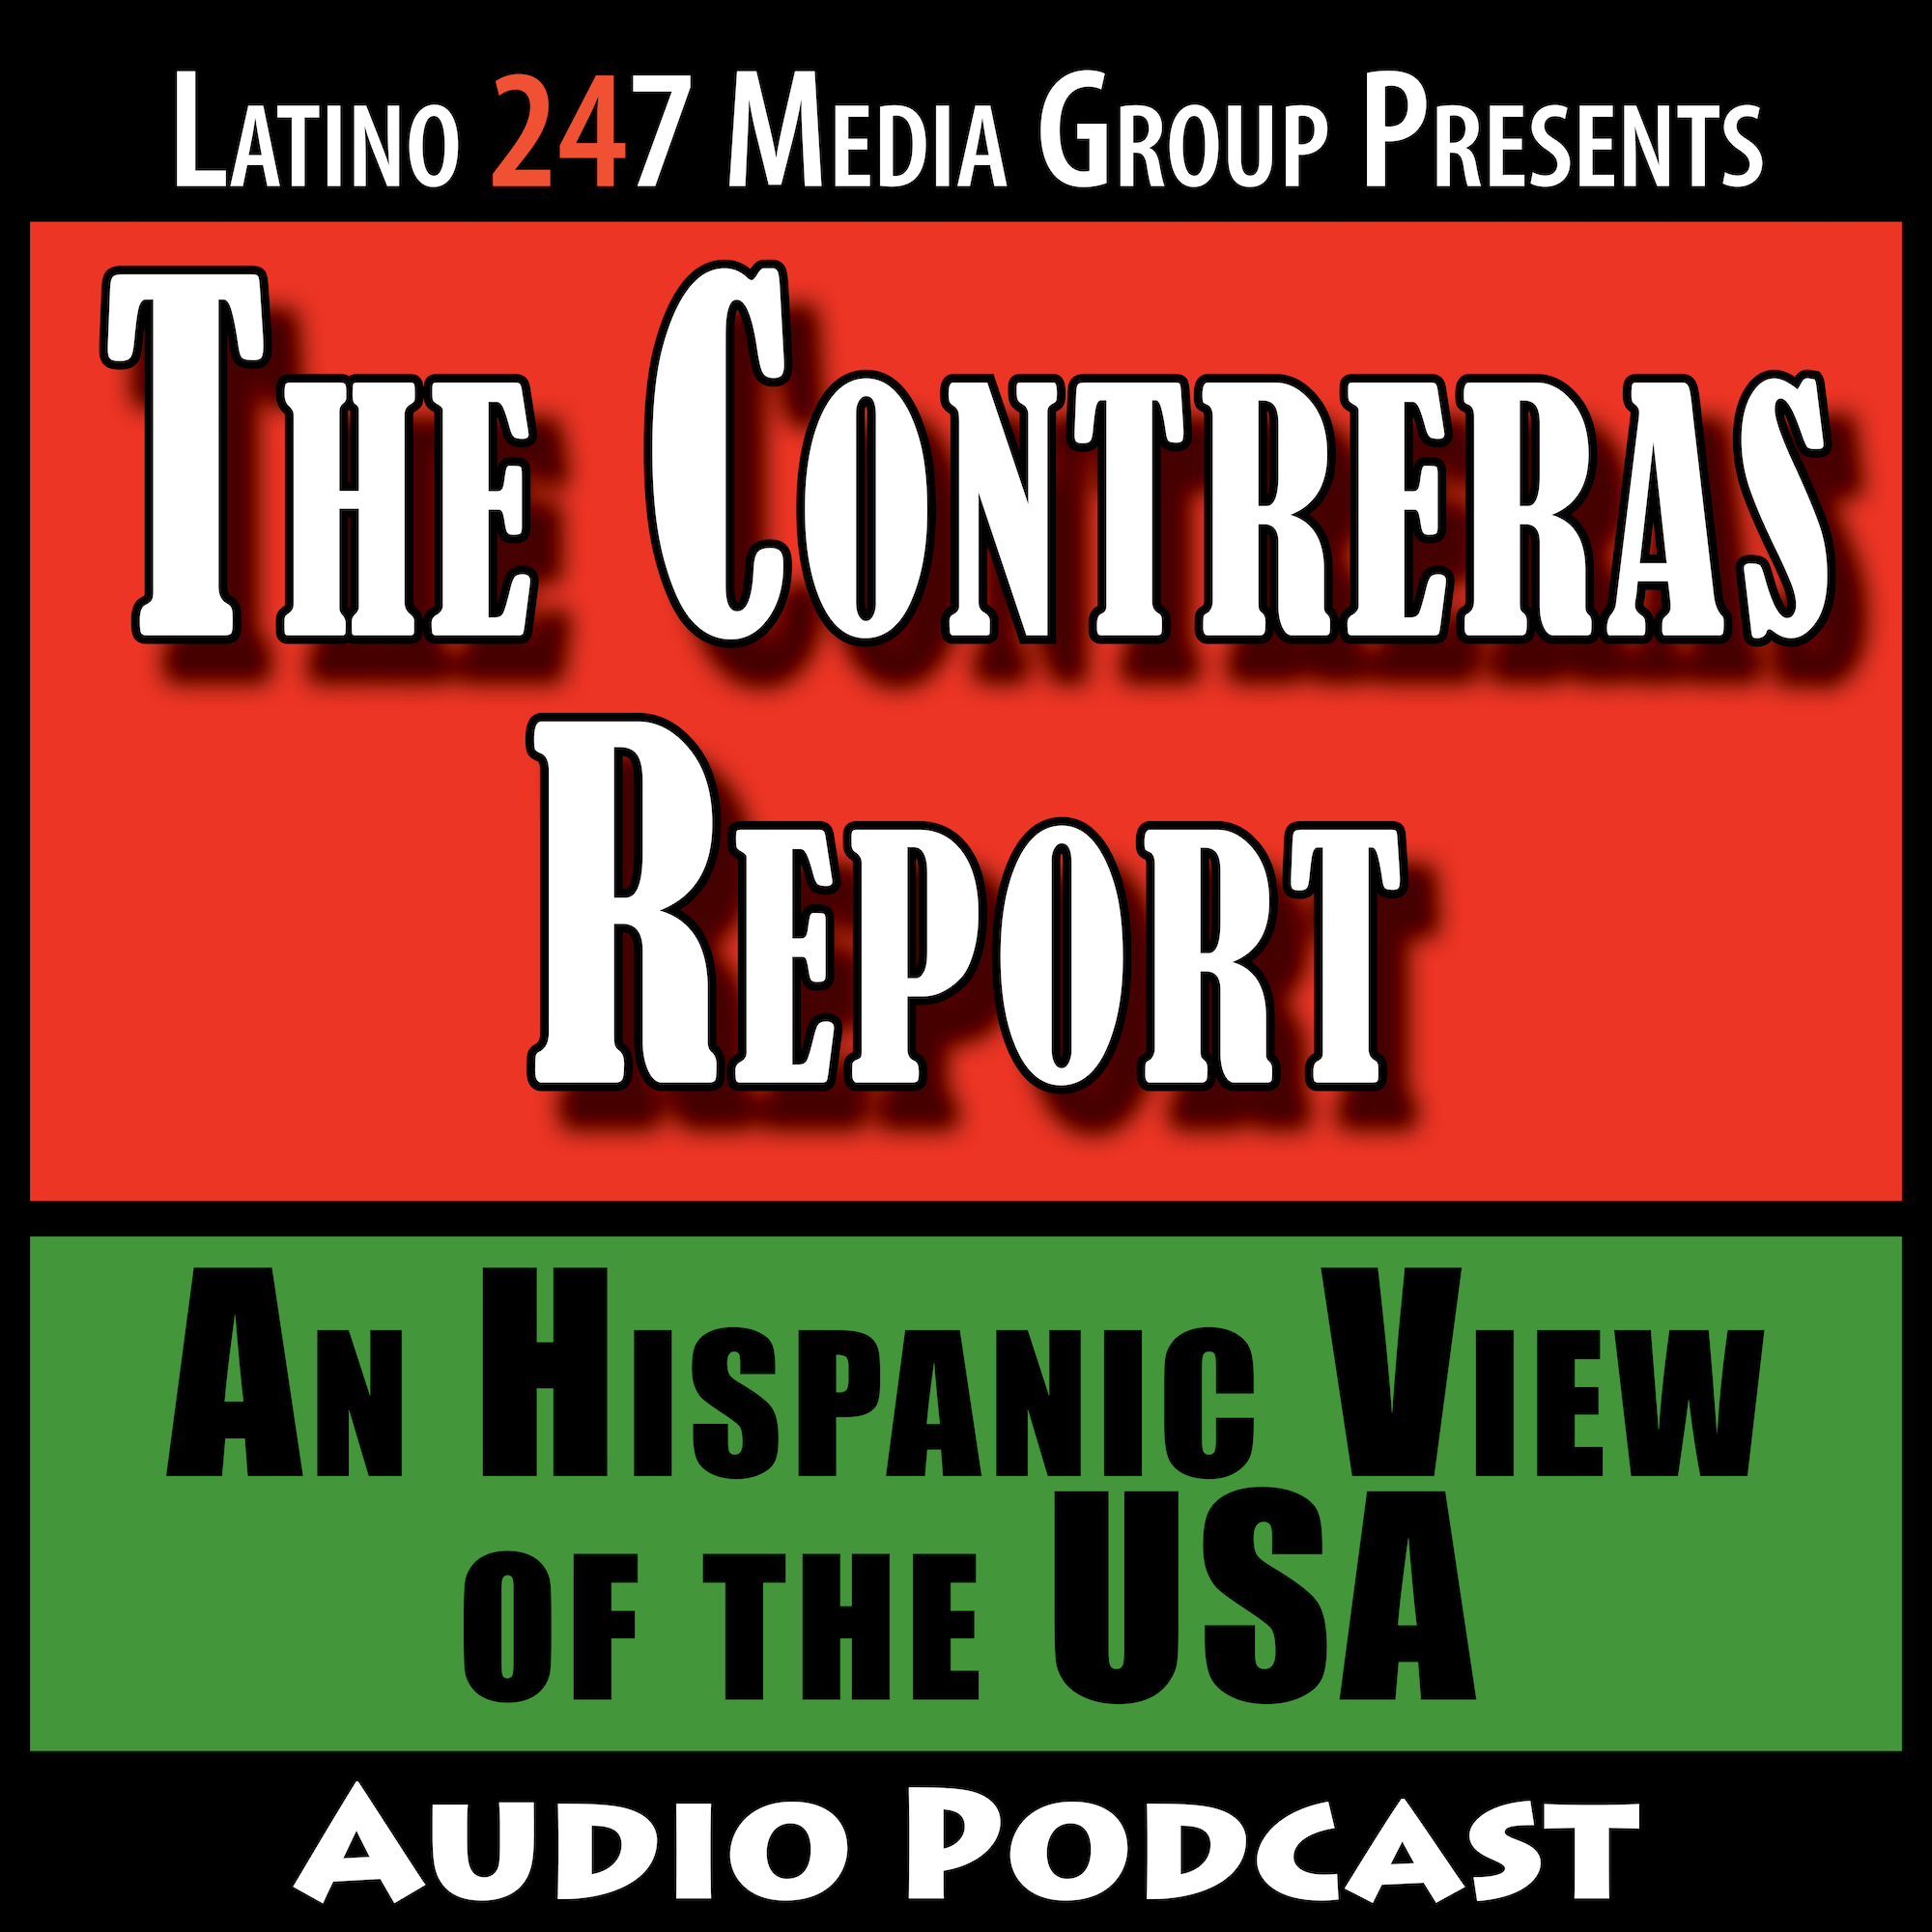 102. The Contreras Report: A Hispanic View of the USA, 10 May 2020